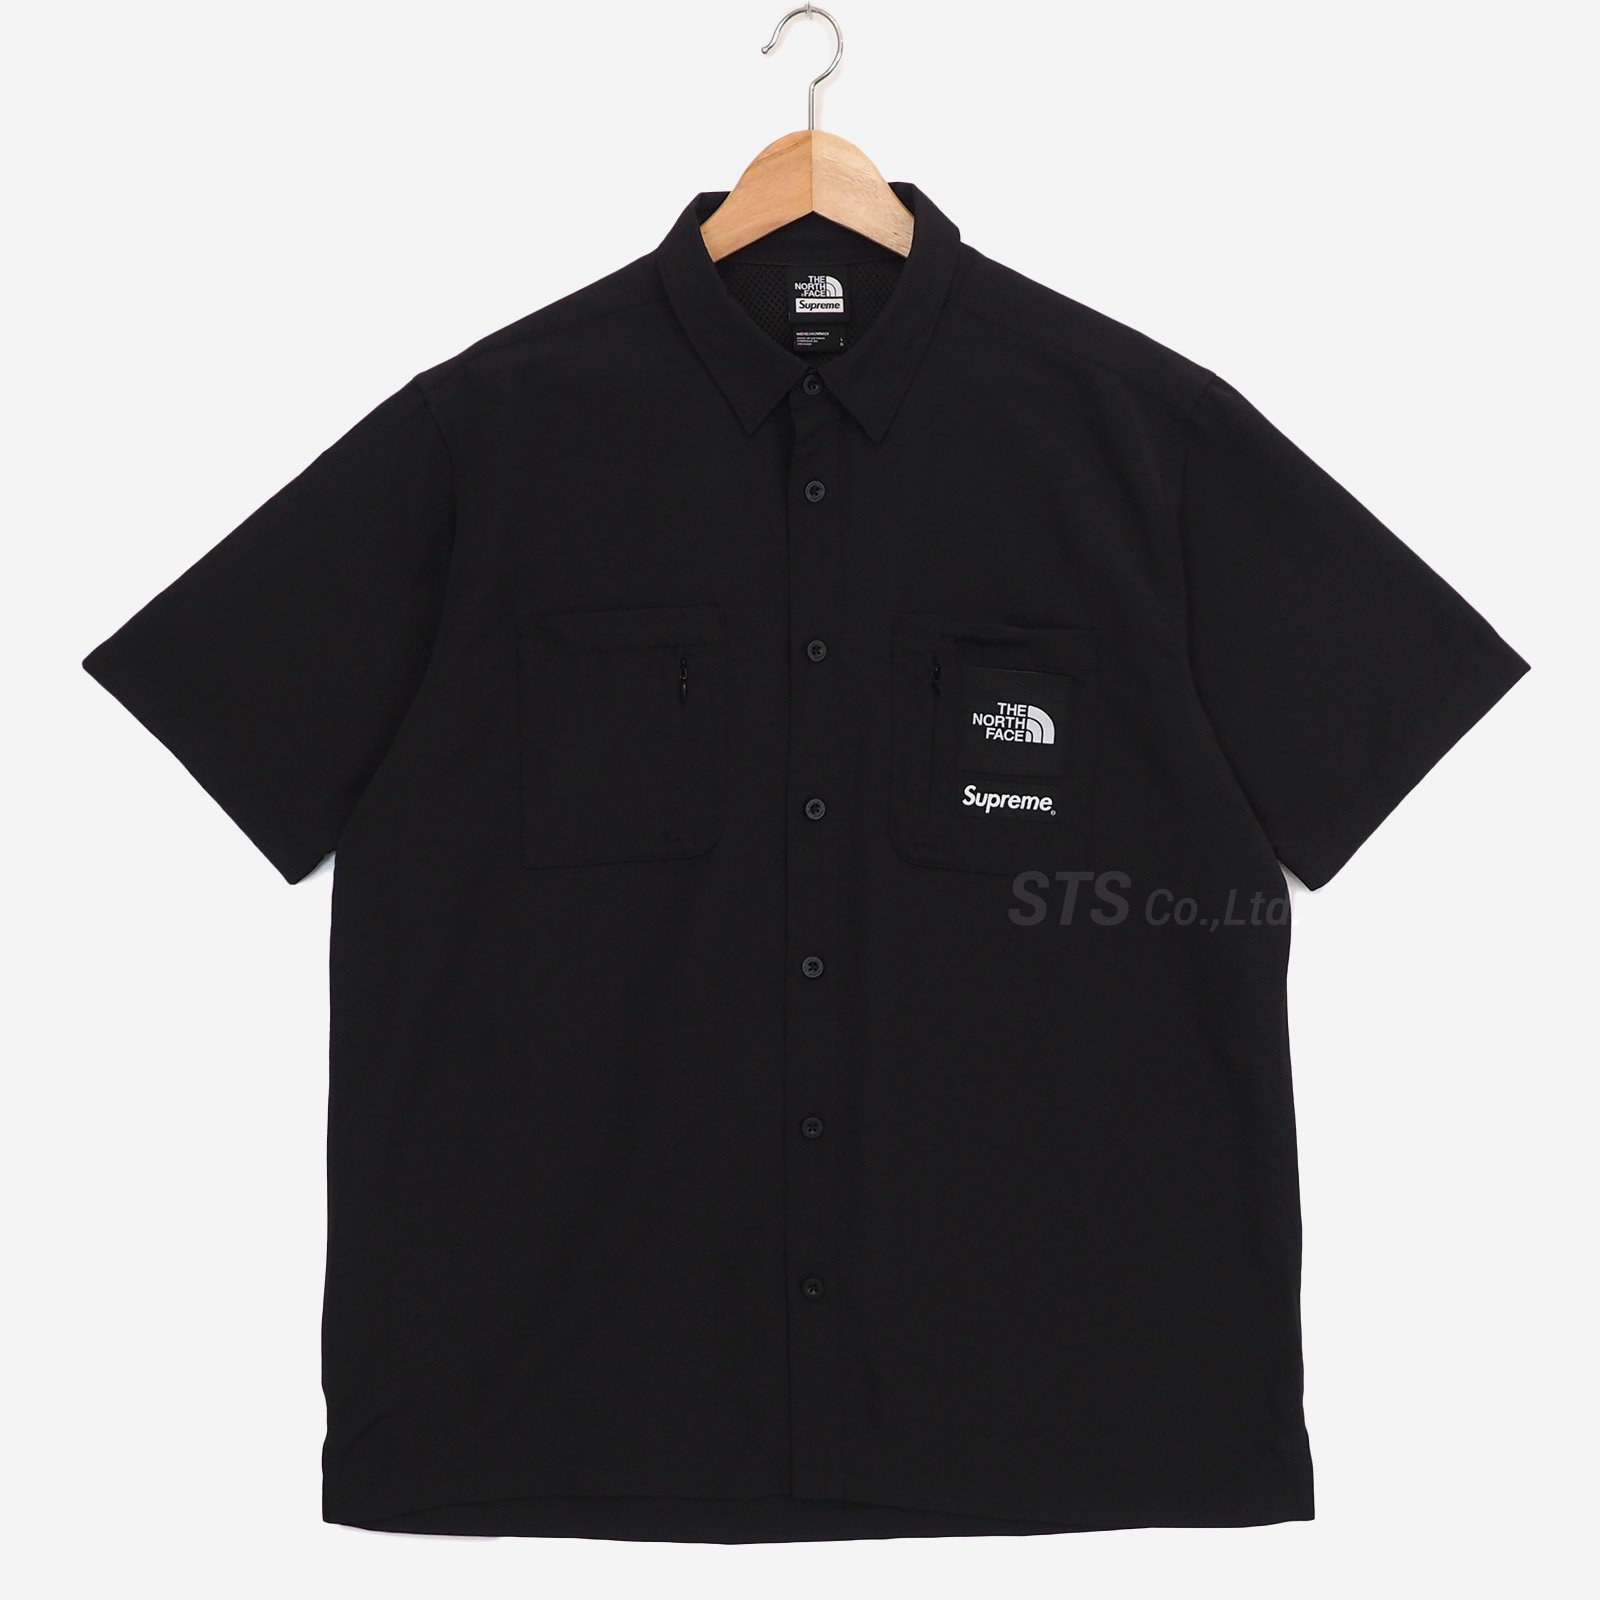 Supreme/The North Face Trekking S/S Shirt - ParkSIDER